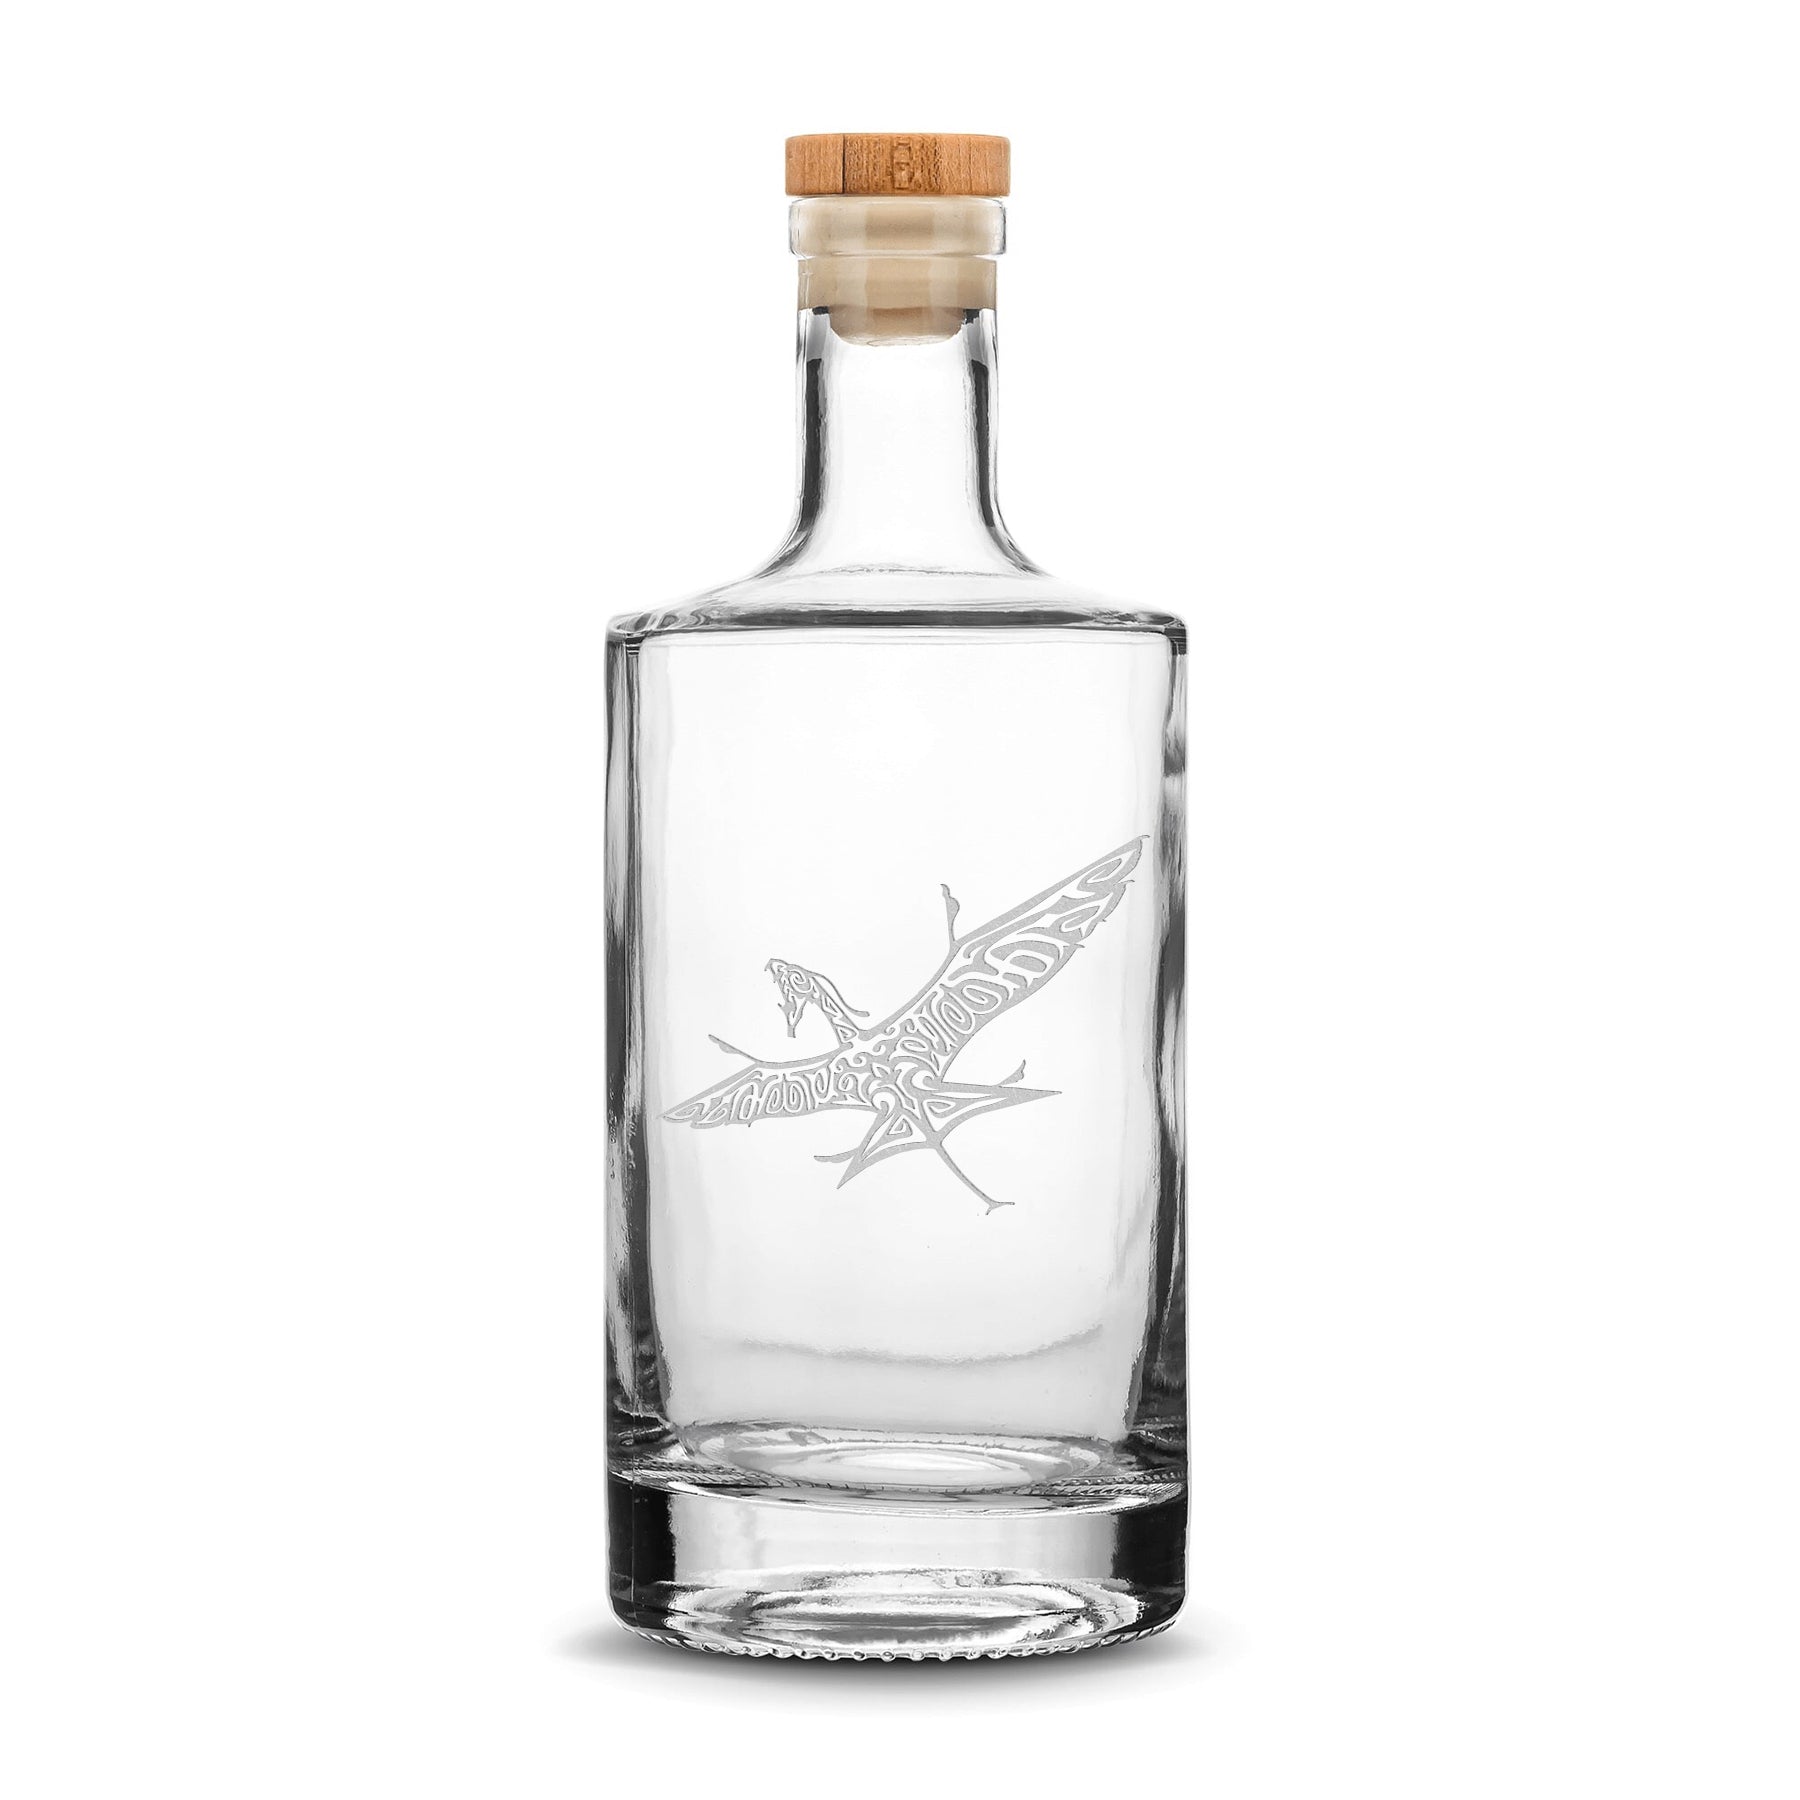 Premium Jersey Whiskey Decanter, Avatar Banshee, 750mL, Laser Etched or Hand Etched